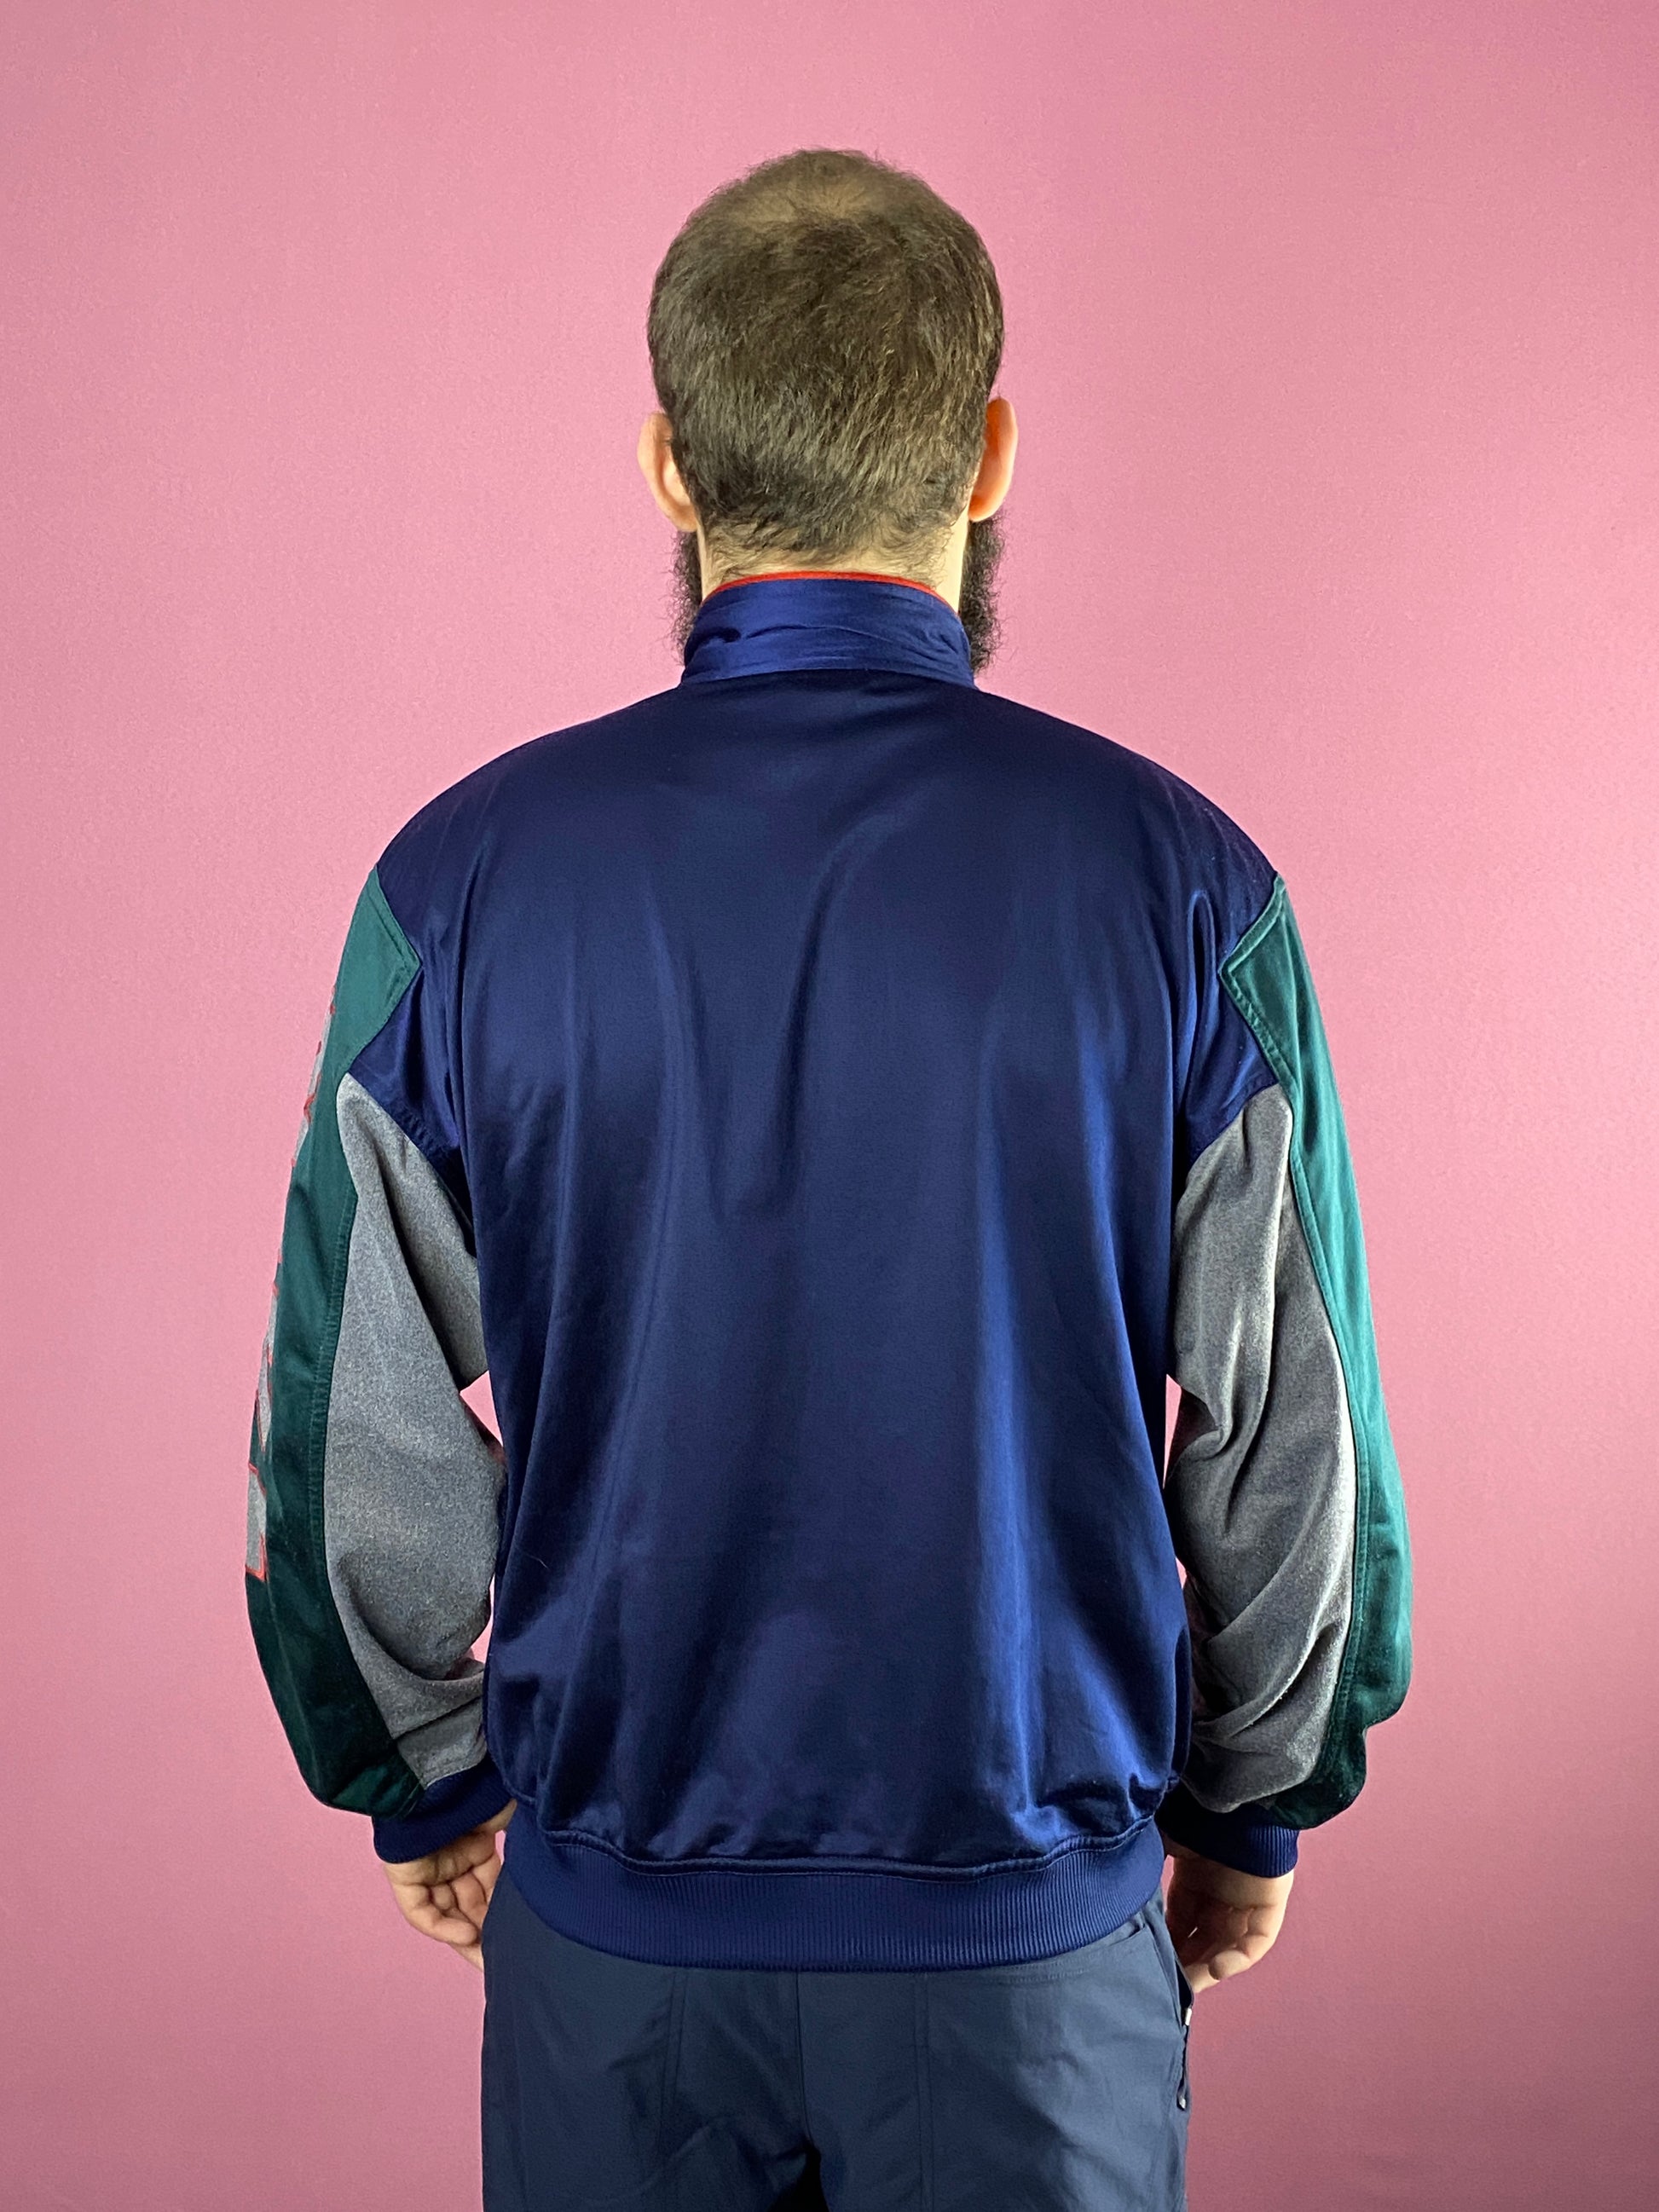 90s Nike Big Spell Out Vintage Men's Track Jacket - M Navy Blue & Green Polyester